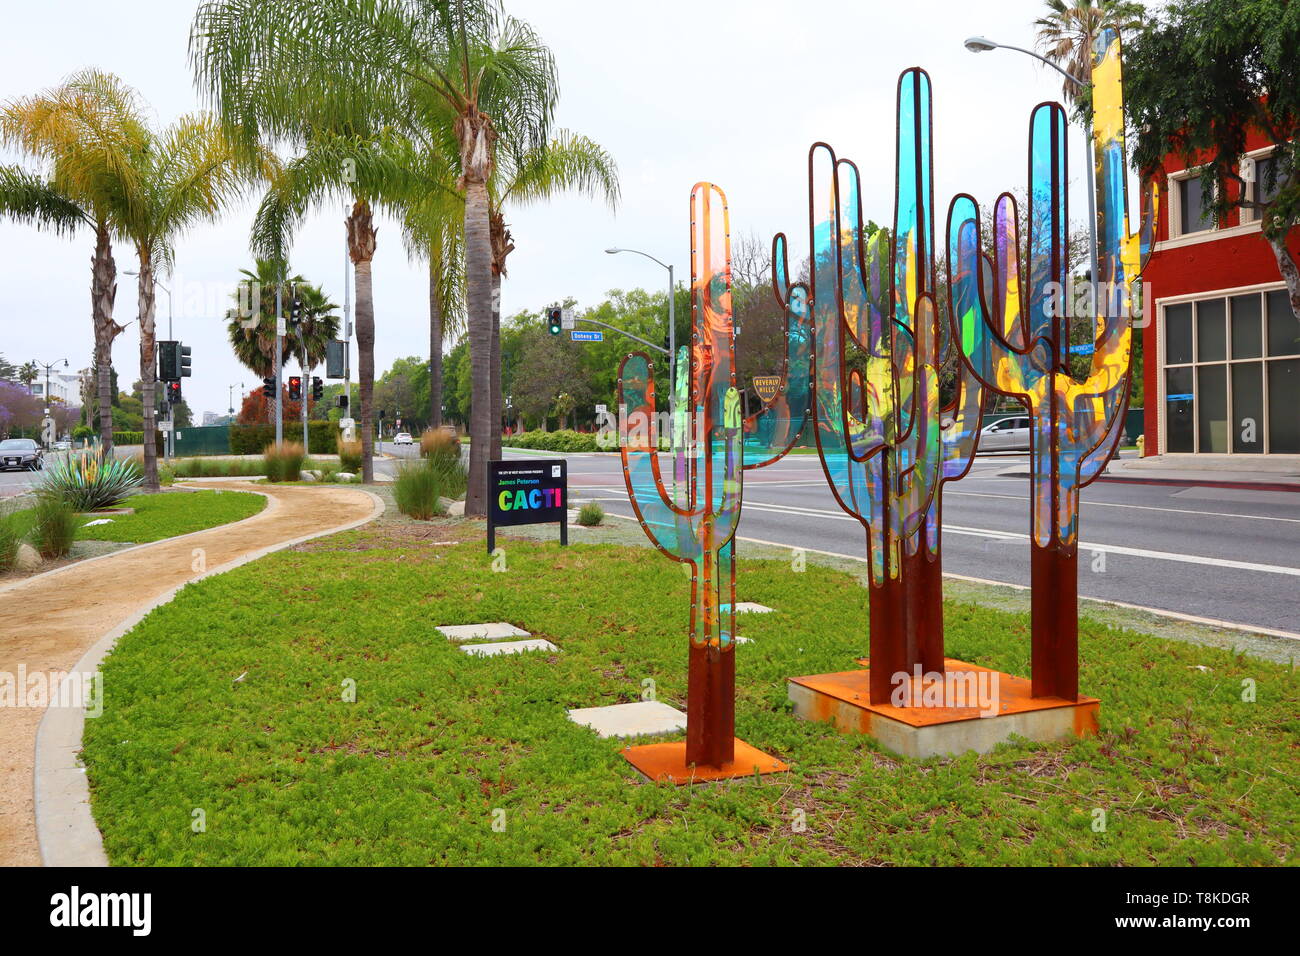 view of Public Art Sculpture CACTI by James Petersen at Santa Monica Blvd. and Doheny Drive, West Hollywood Stock Photo